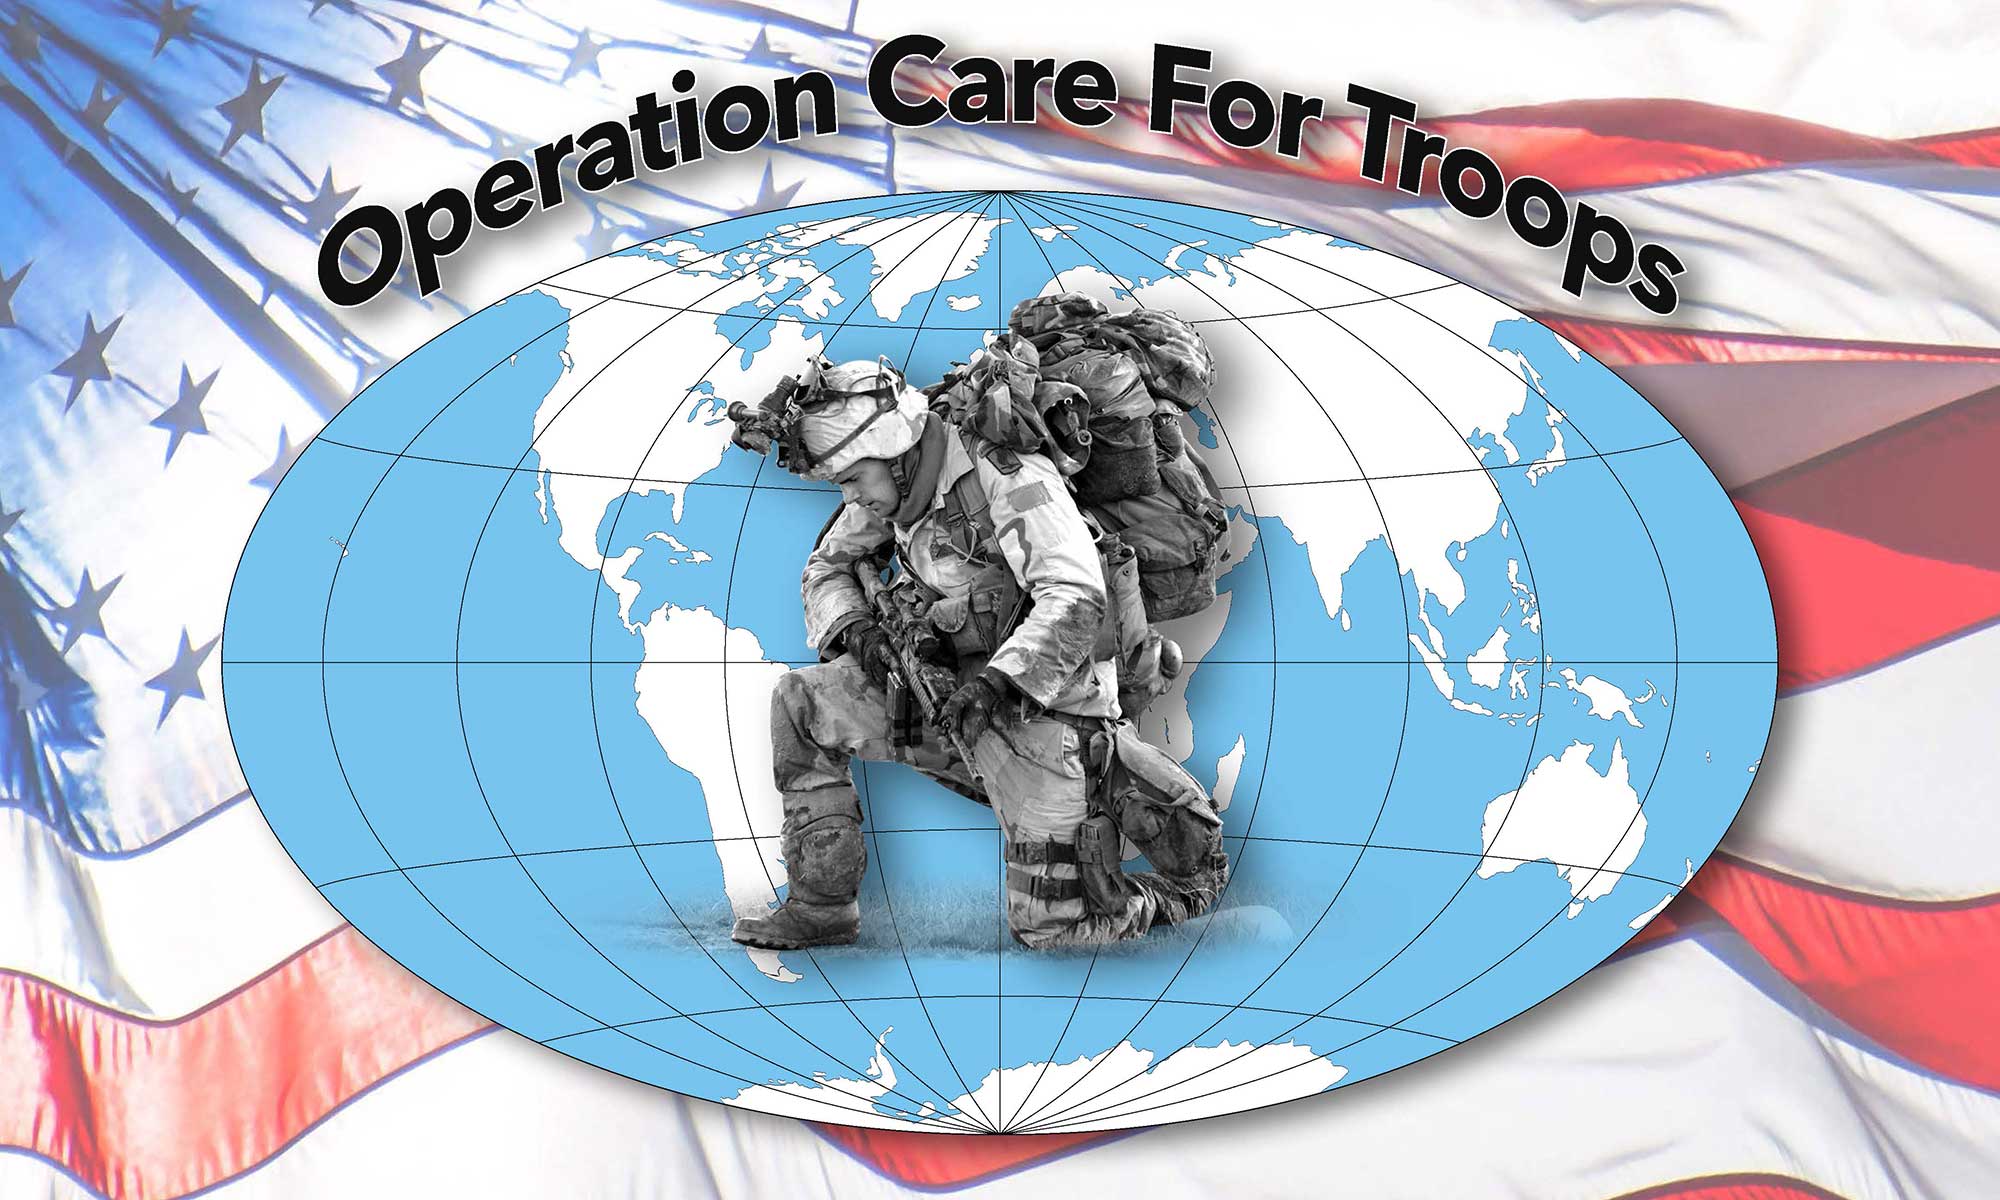 Operation Care for Troops 